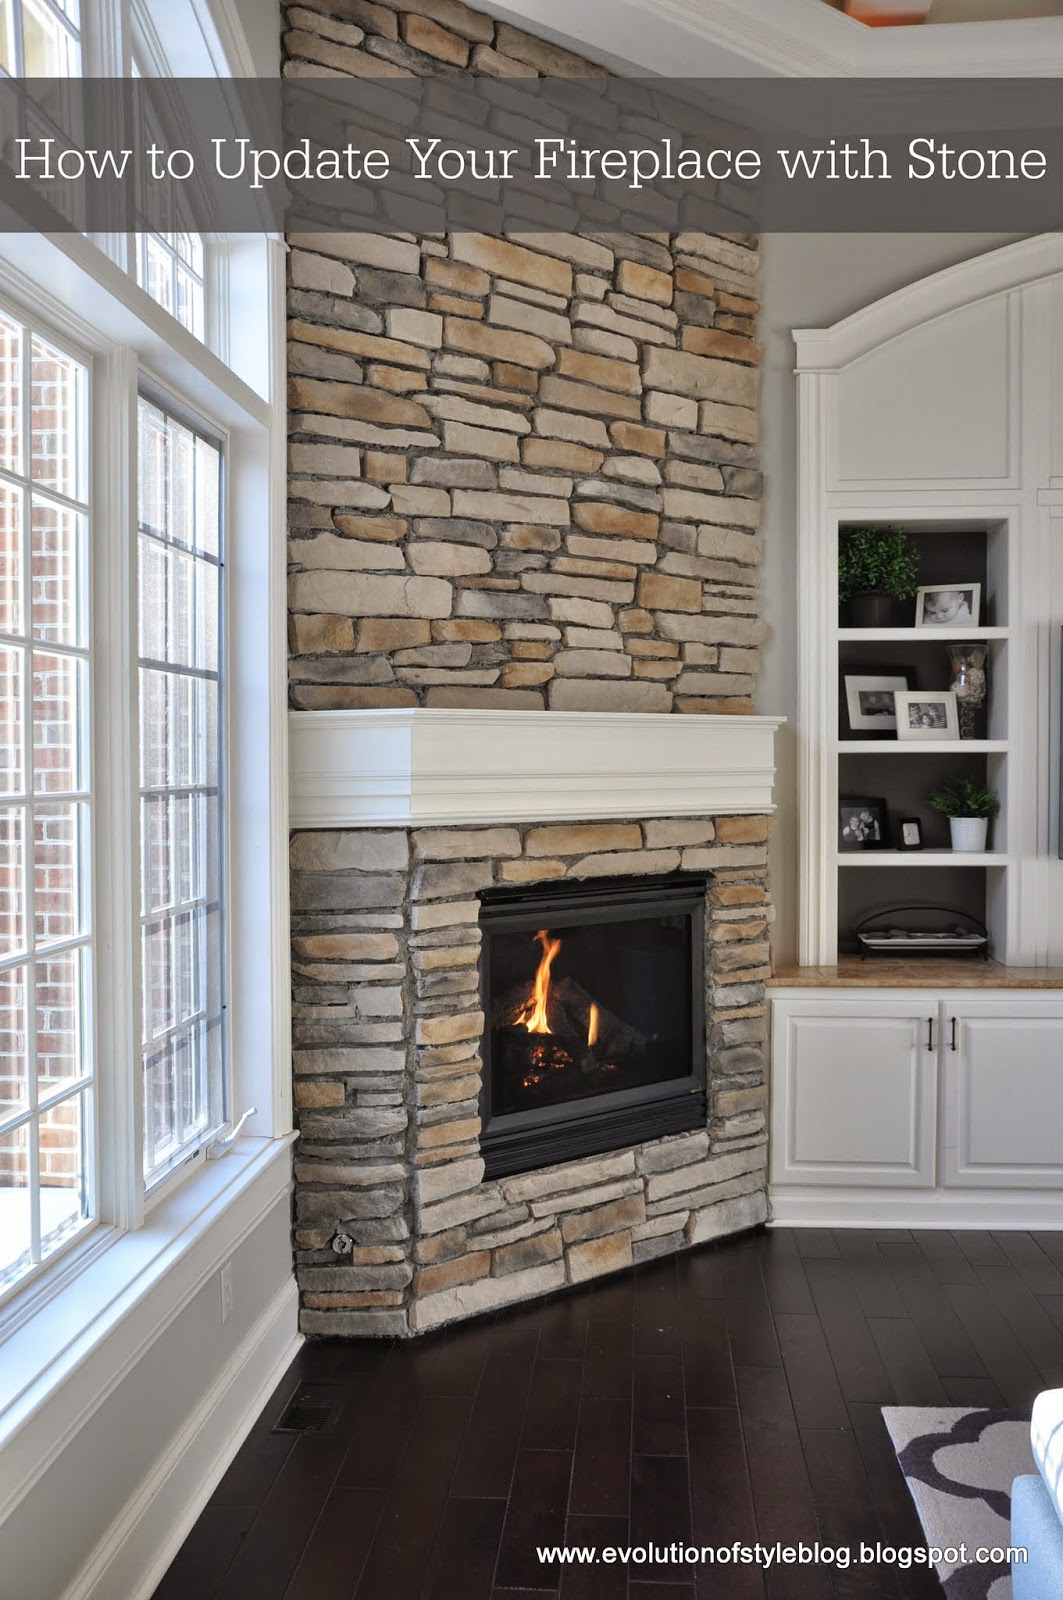 Dry Stack Stone Fireplace Fresh How to Update Your Fireplace with Stone Evolution Of Style